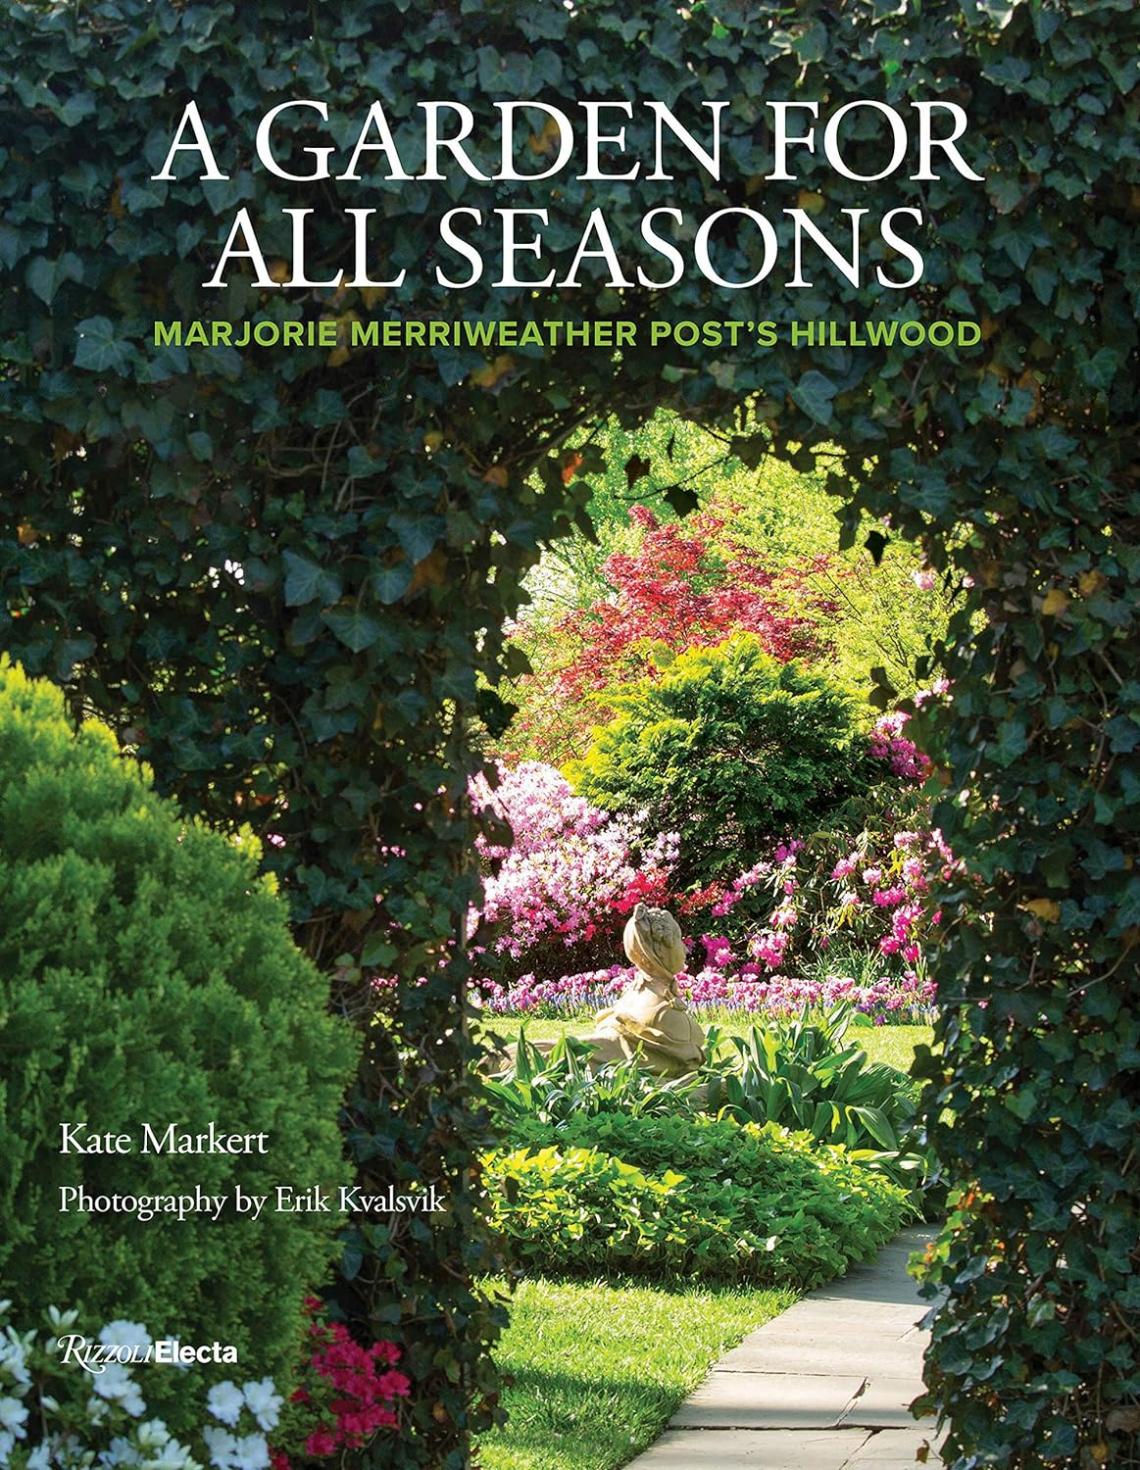 A Garden for All Seasons: Marjorie Merriweather Post's Hillwood by Kate Markert